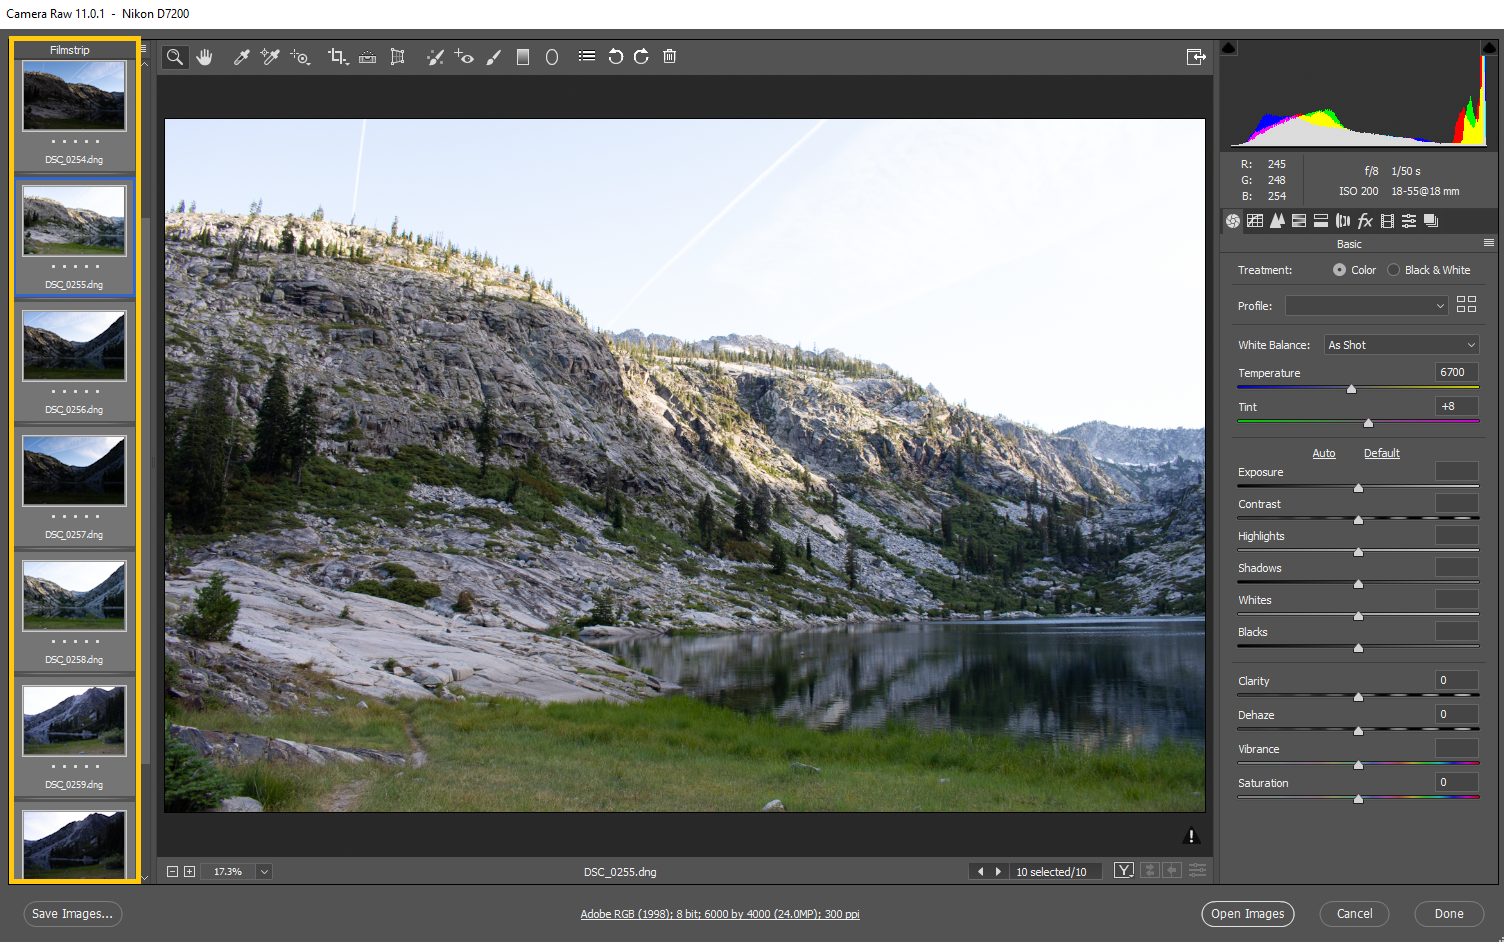 adobe camera raw for photoshop cs6 in mac adobe does not recognize this type of file